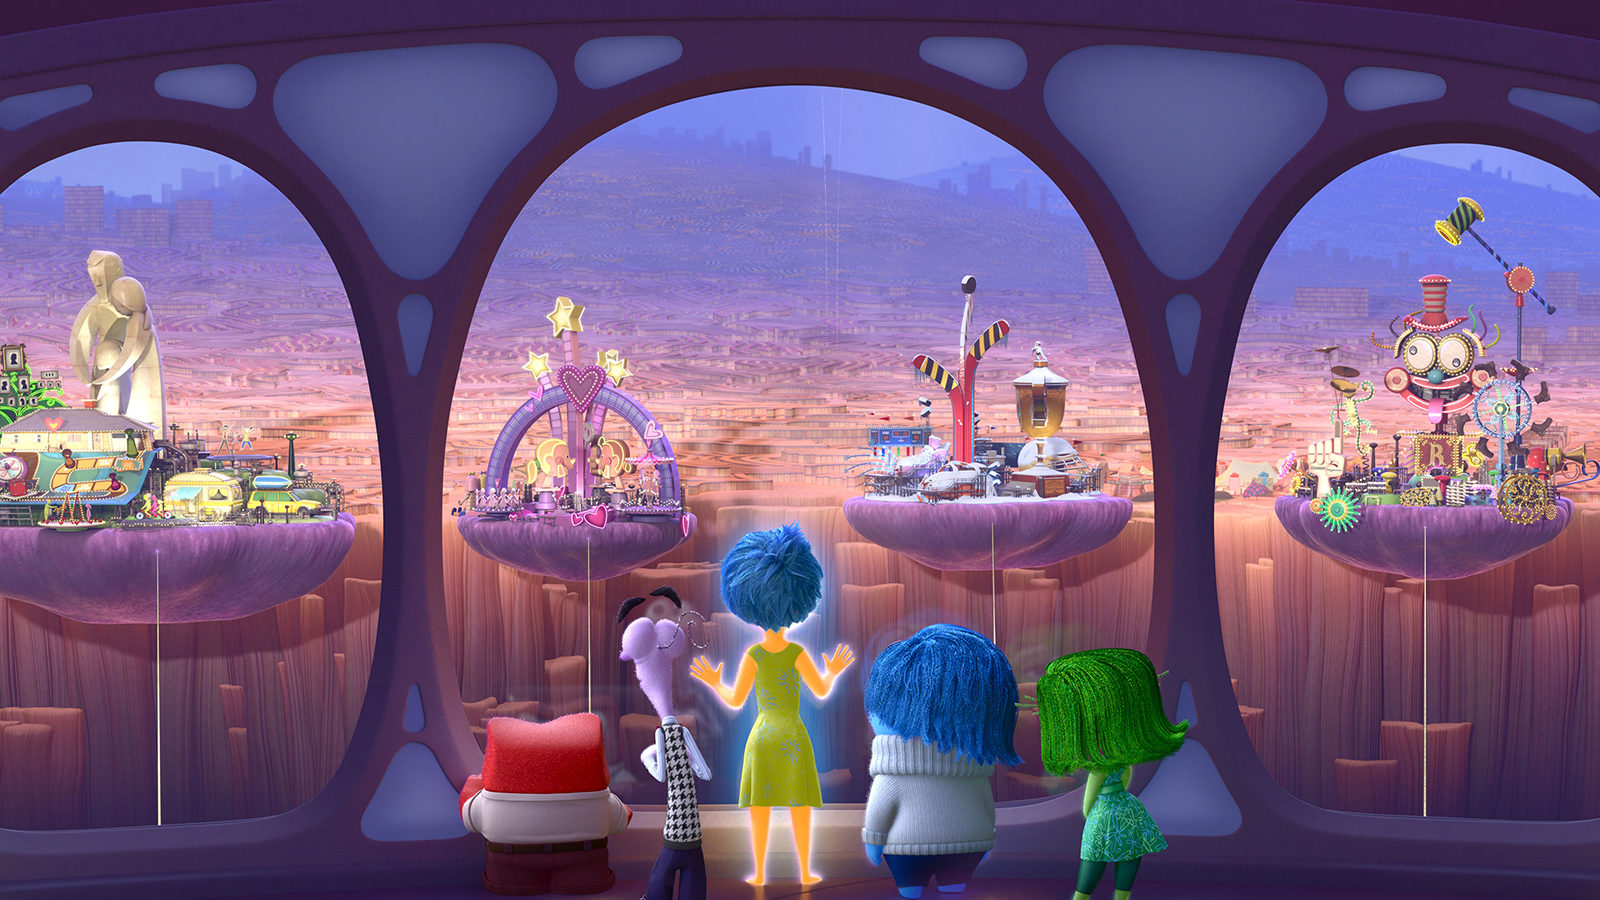 movie review essay inside out